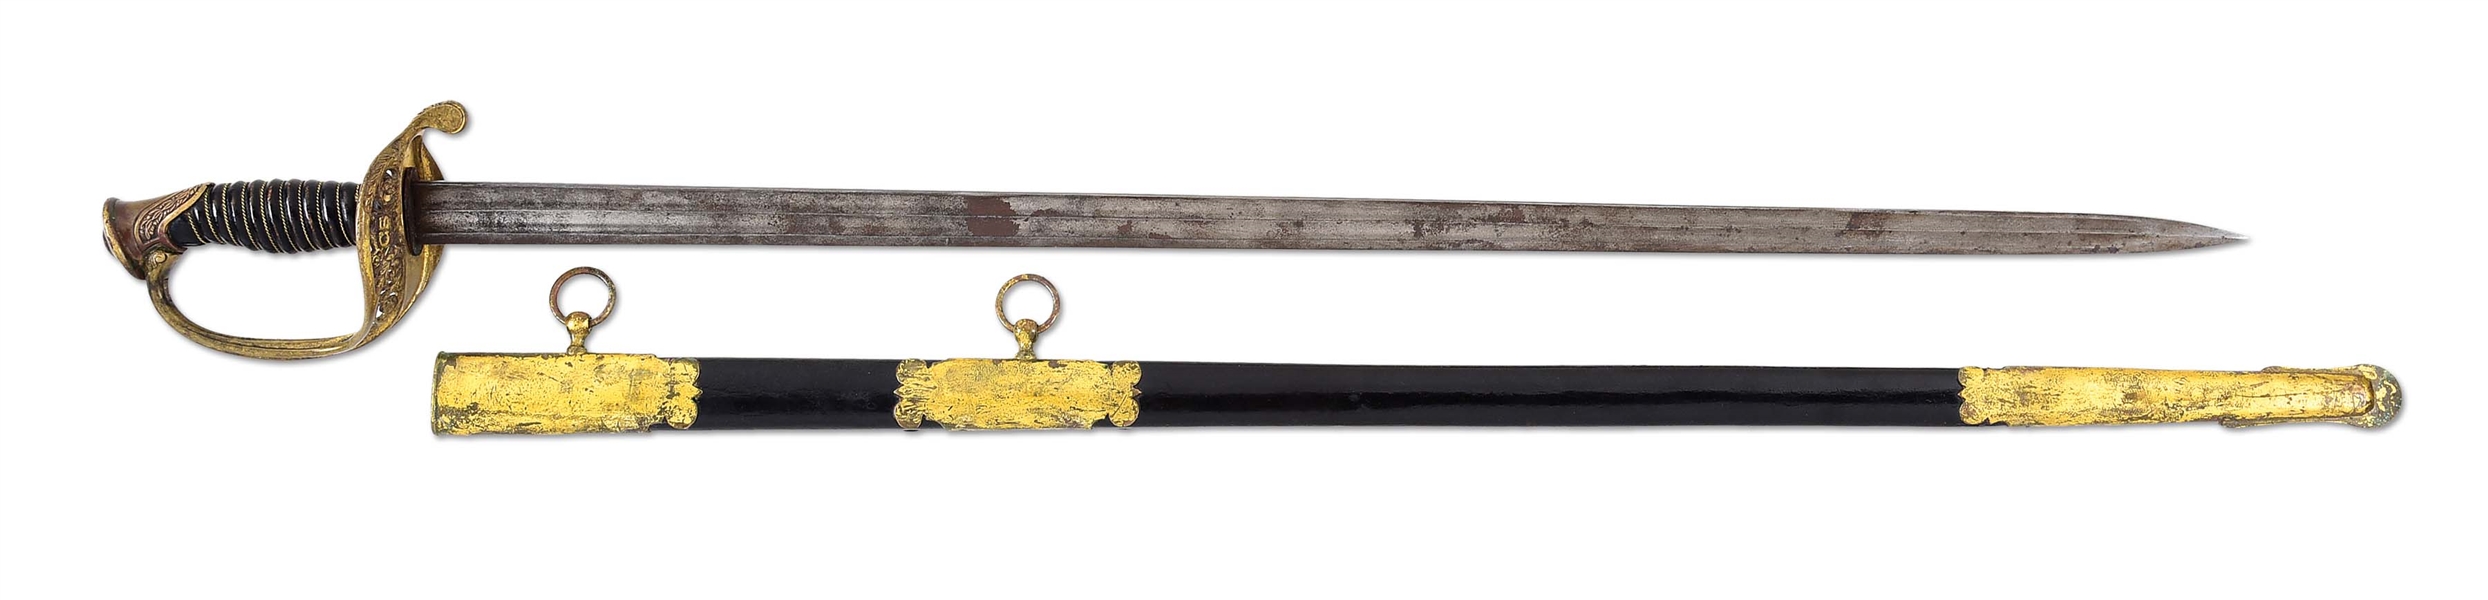 CONFEDERATE CIVIL WAR LOUIS FROELICH FOOT OFFICER SWORD.